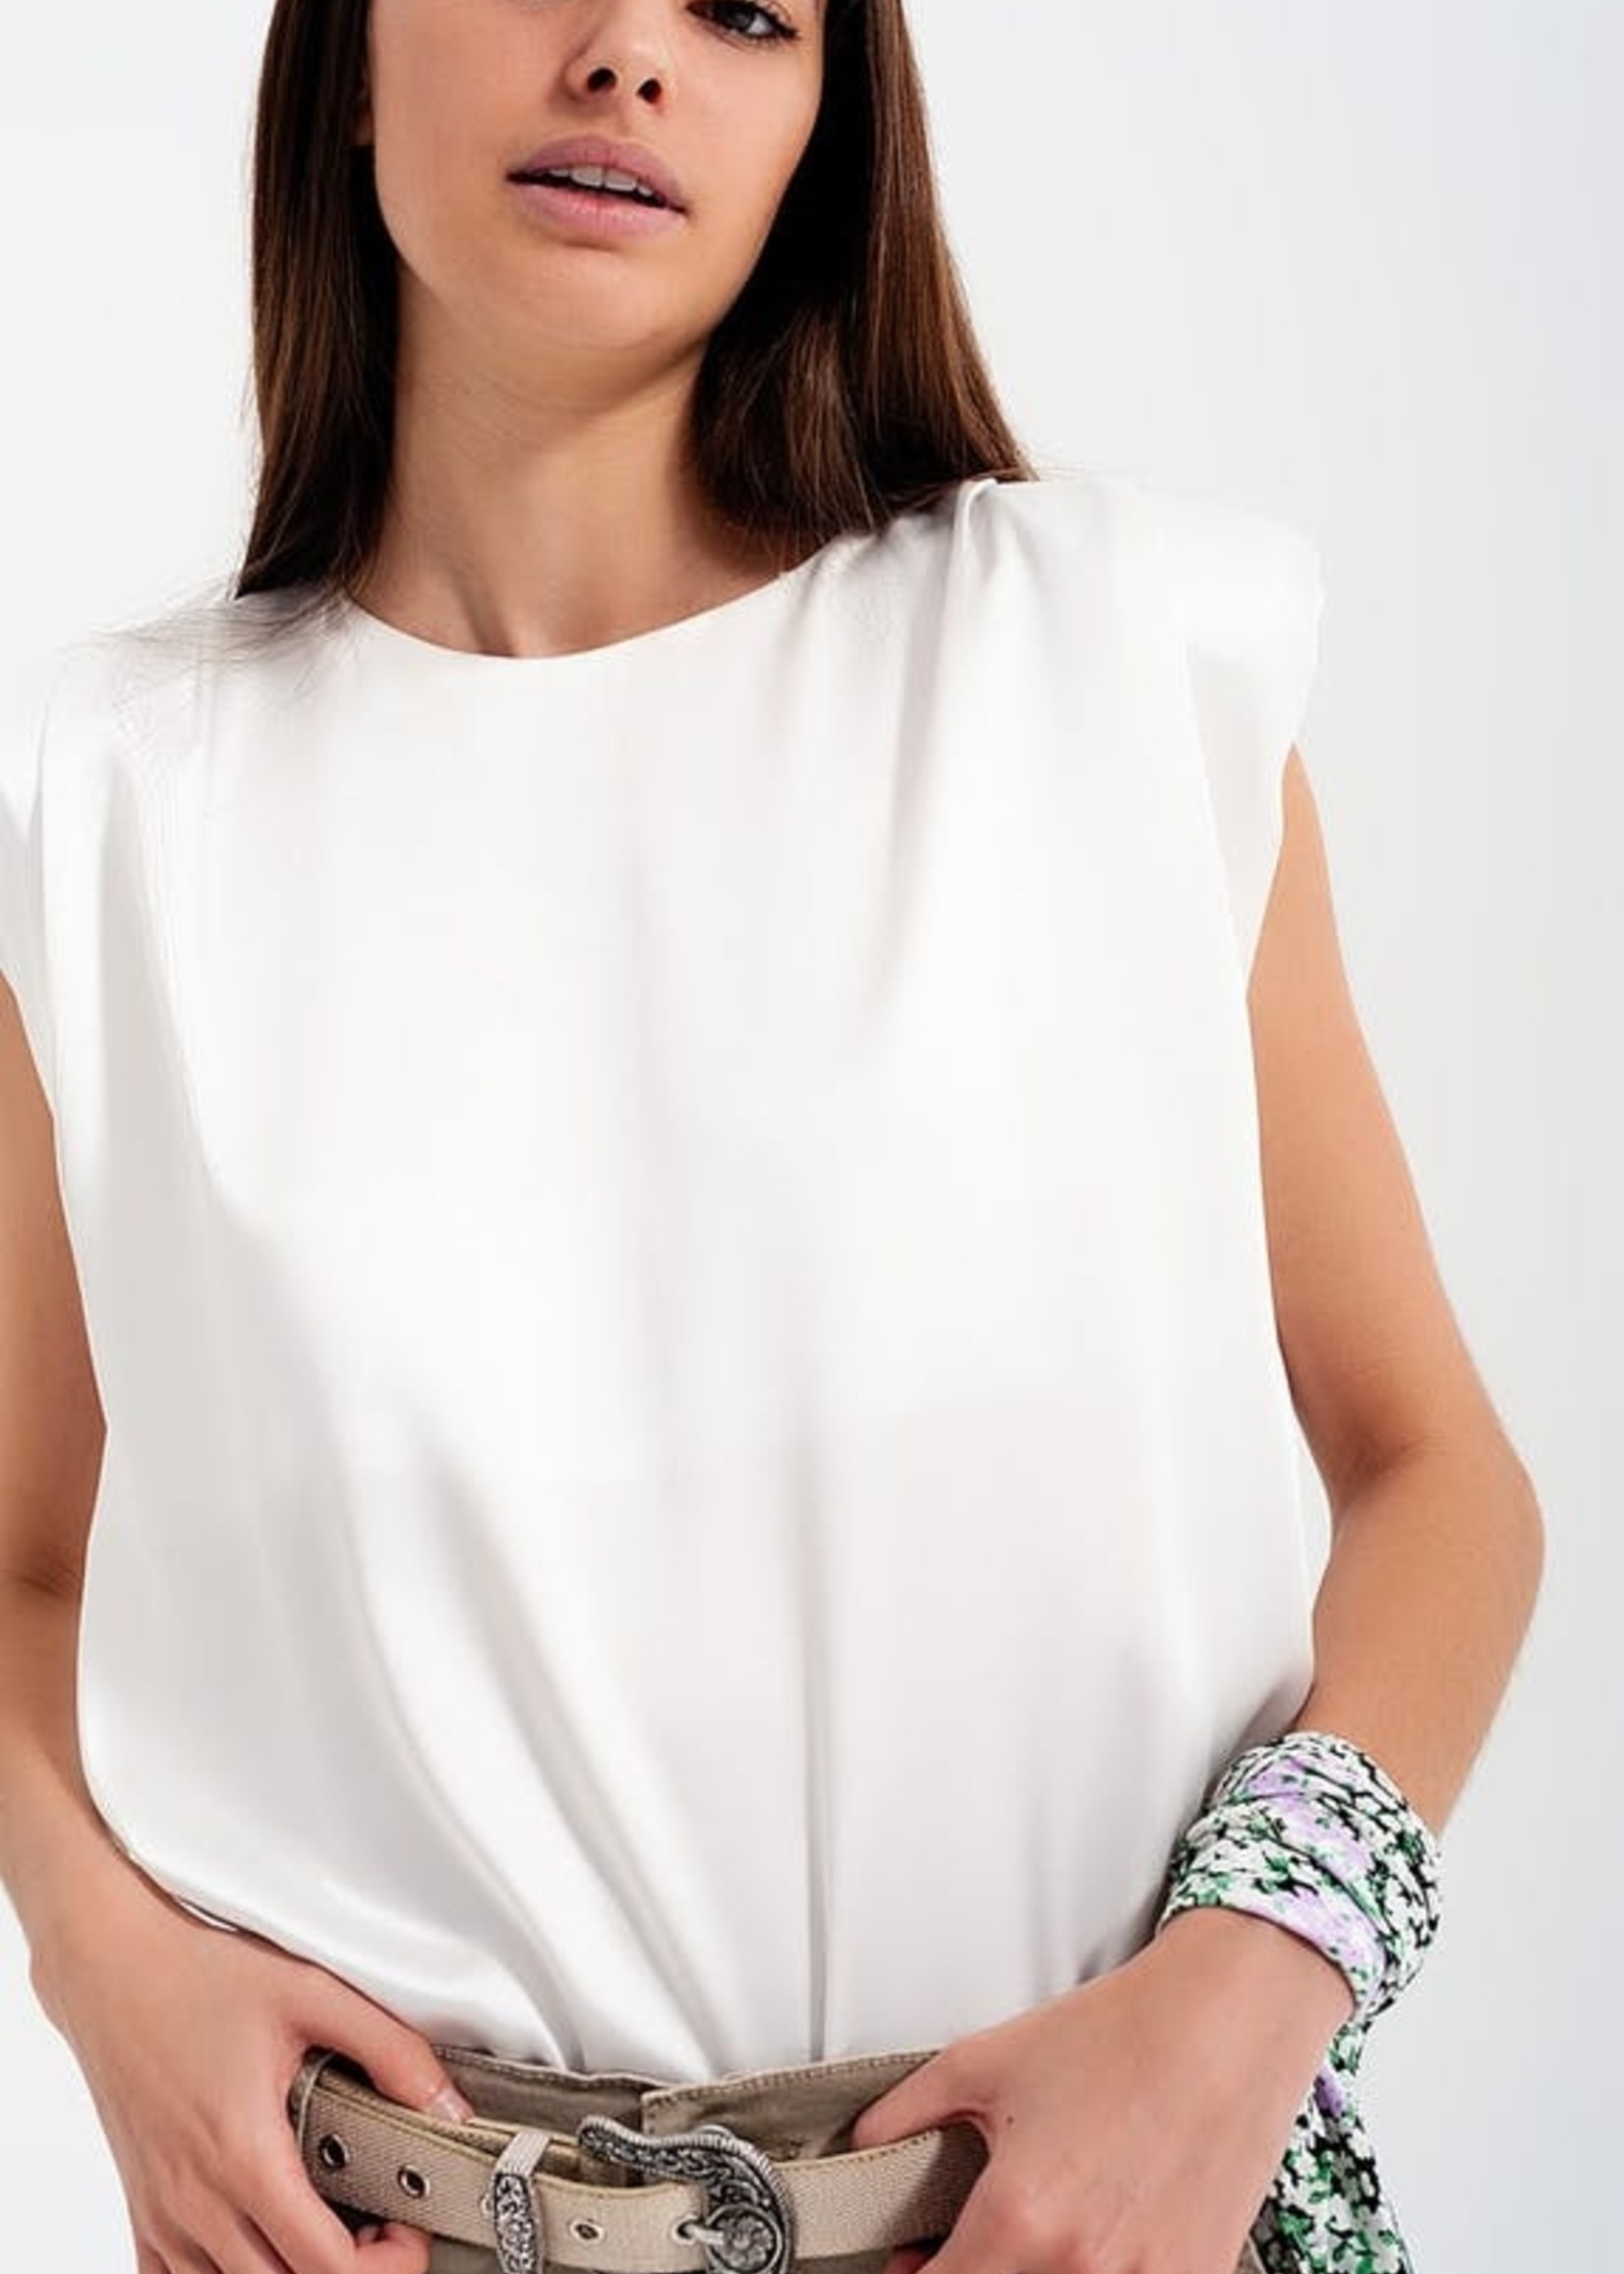 Q2 Gathered satin shoulder pad sleeveless top in white